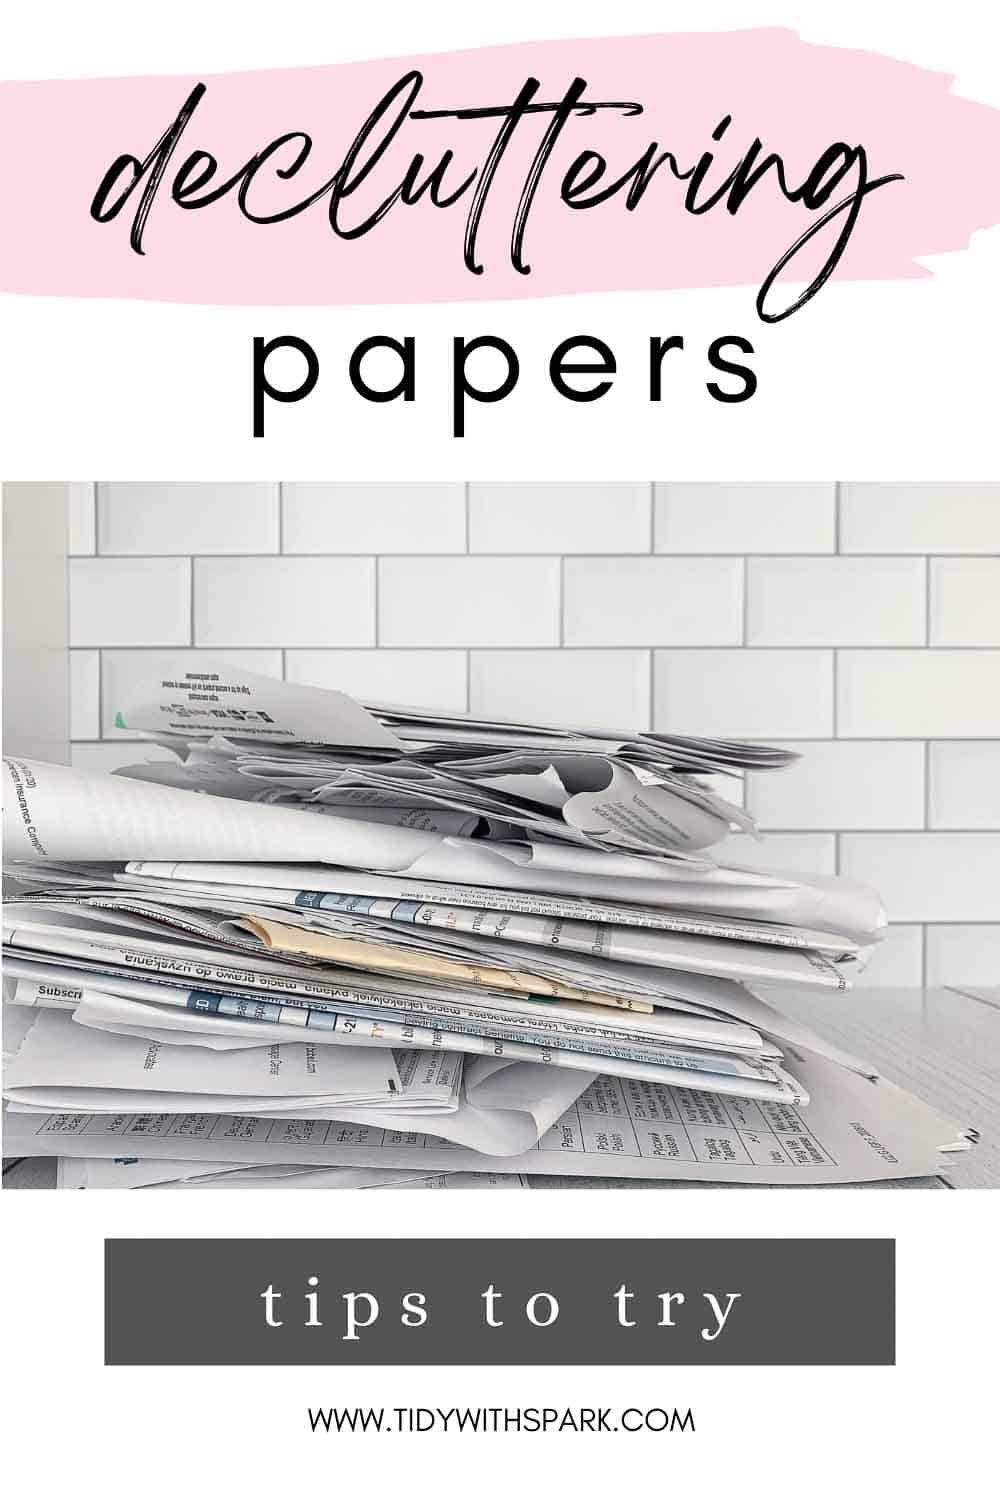 Promotional image for How to declutter and organize papers for tidy with spark blog